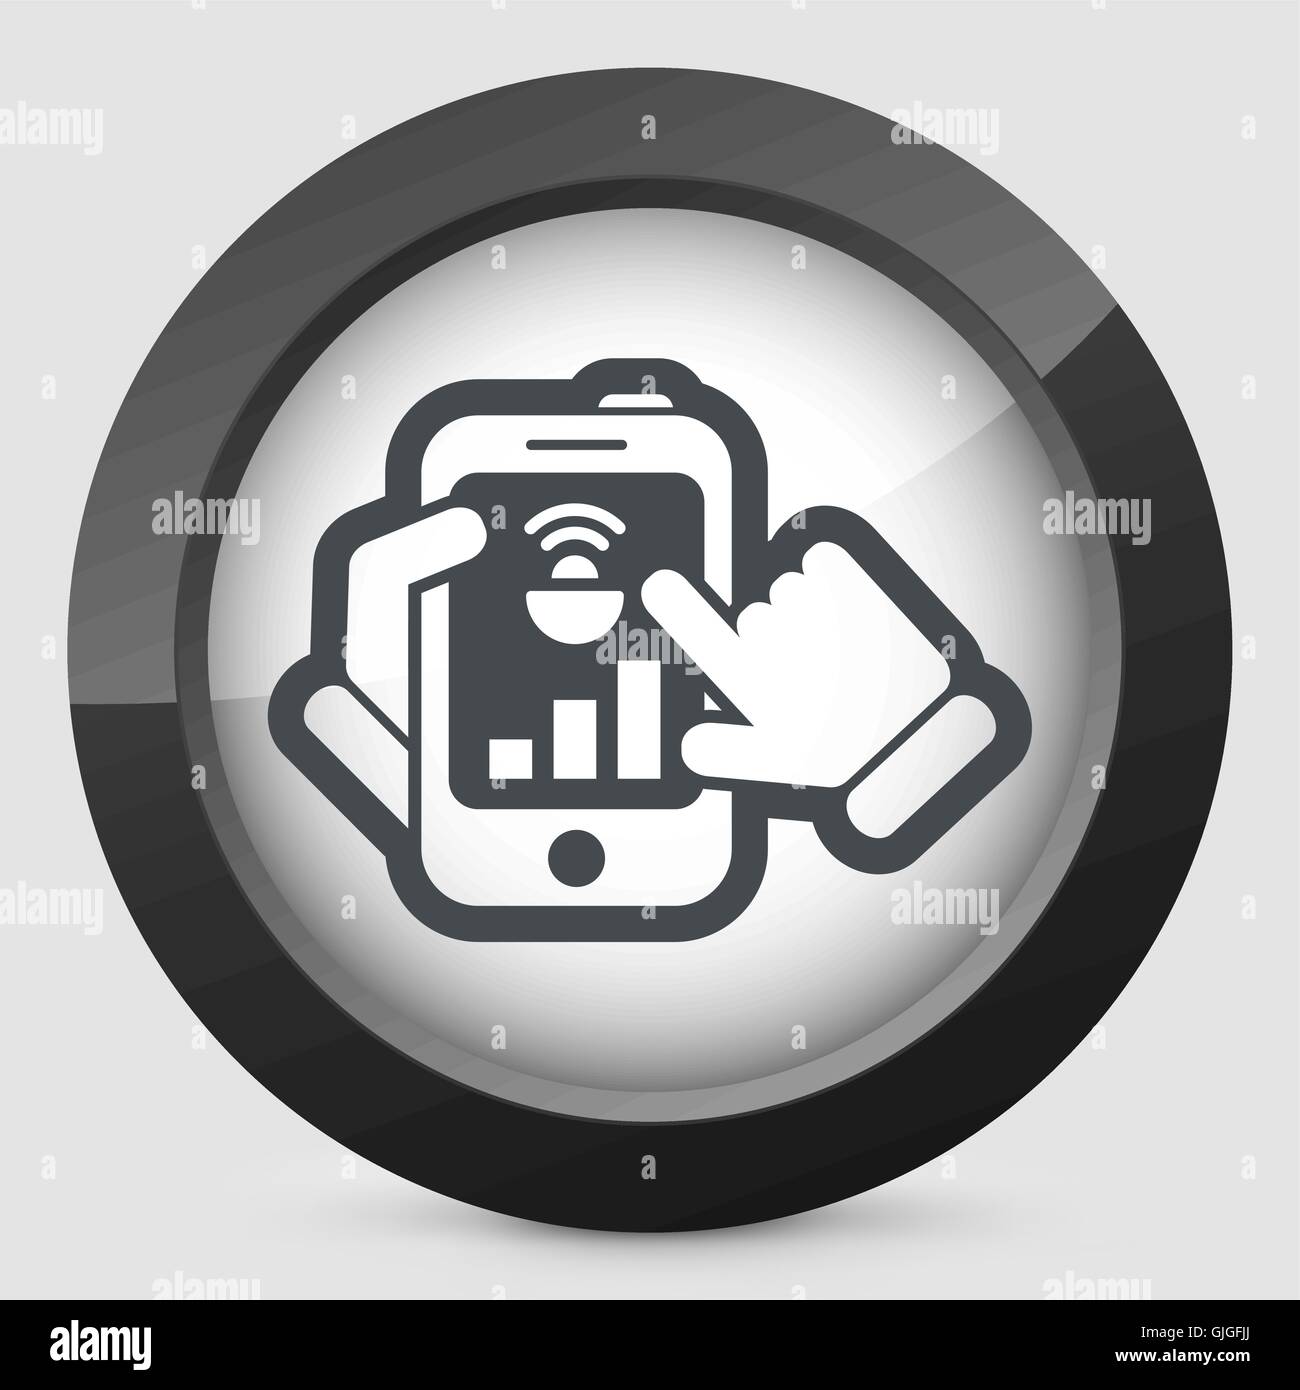 Smartphone connection icon Stock Vector